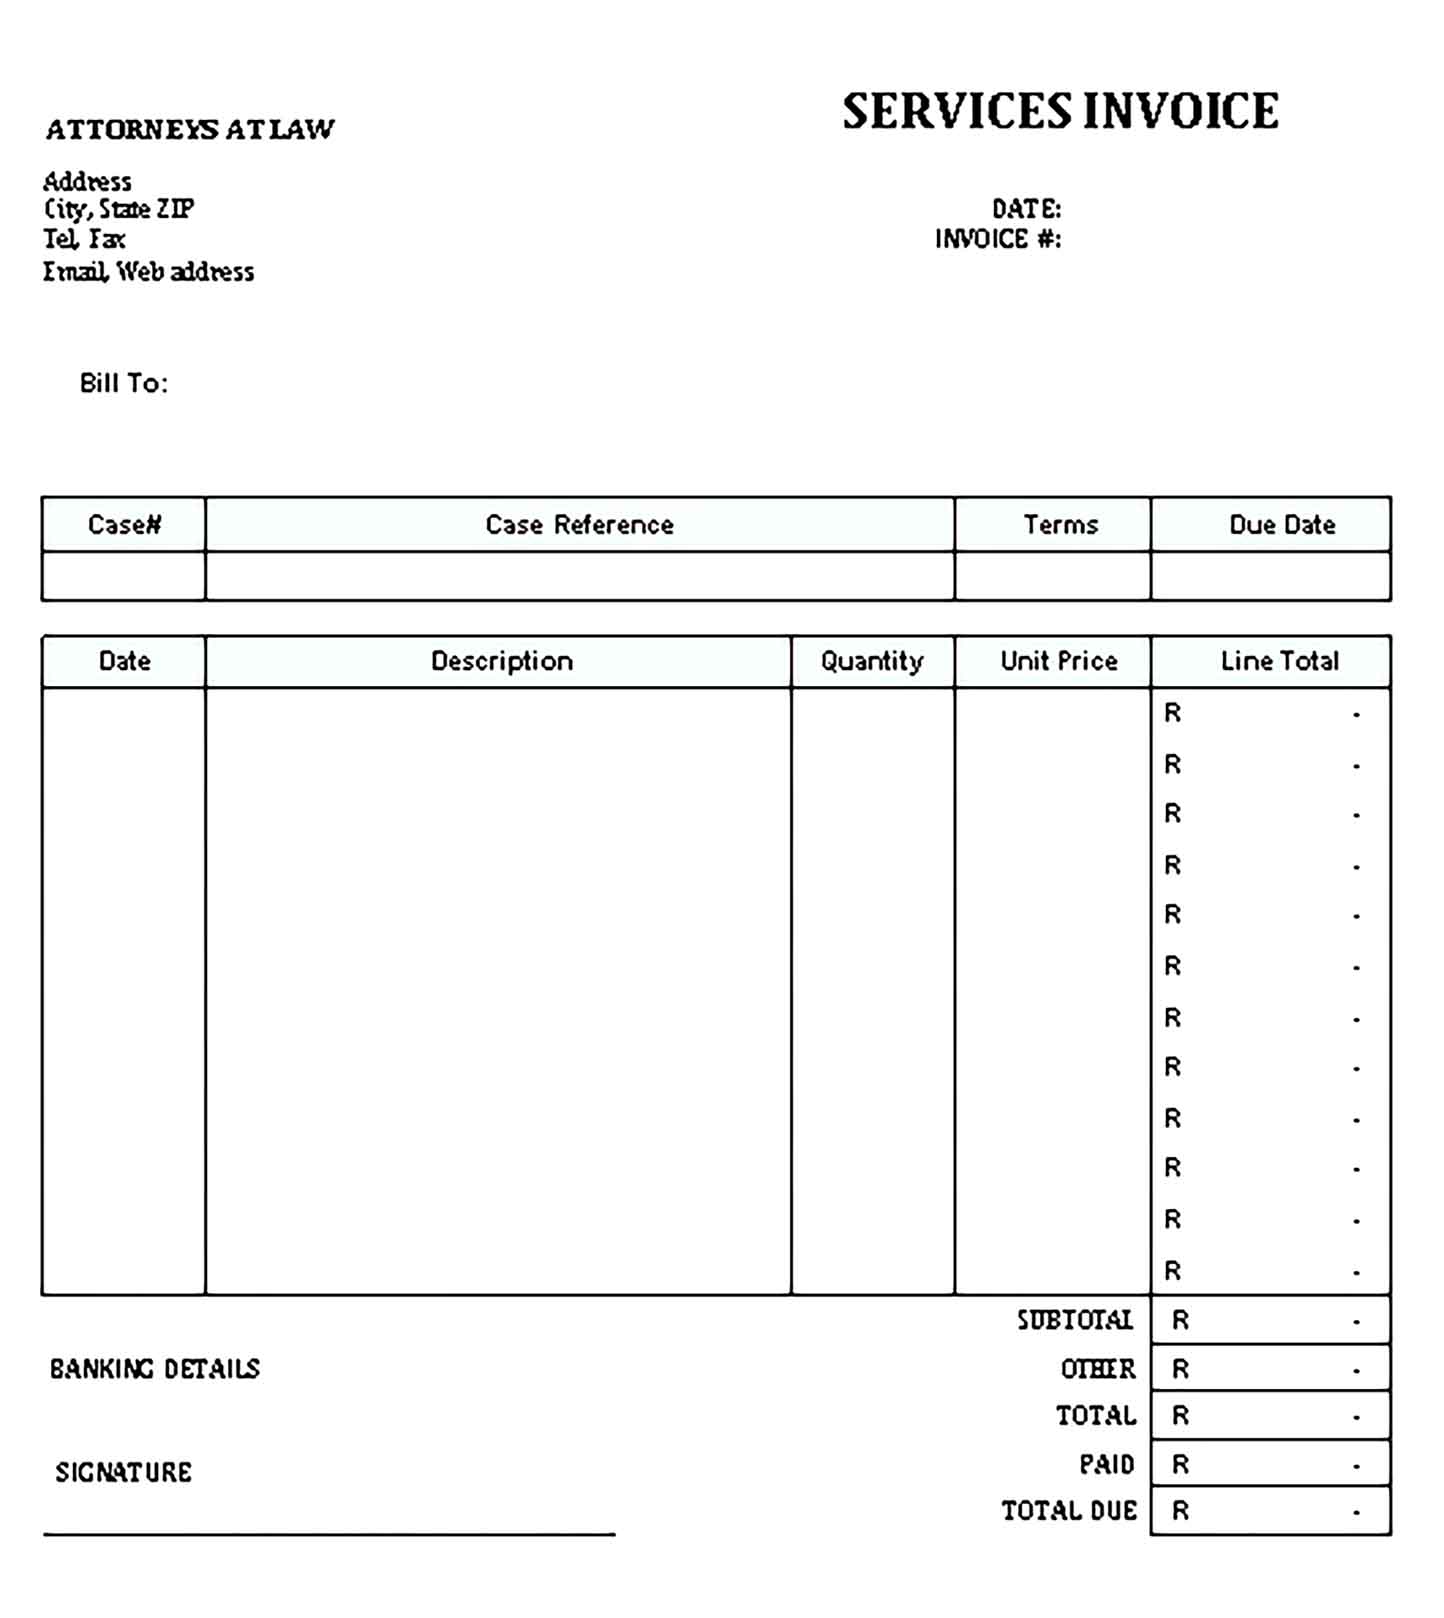 Sample Templates Invoice for Legal Services